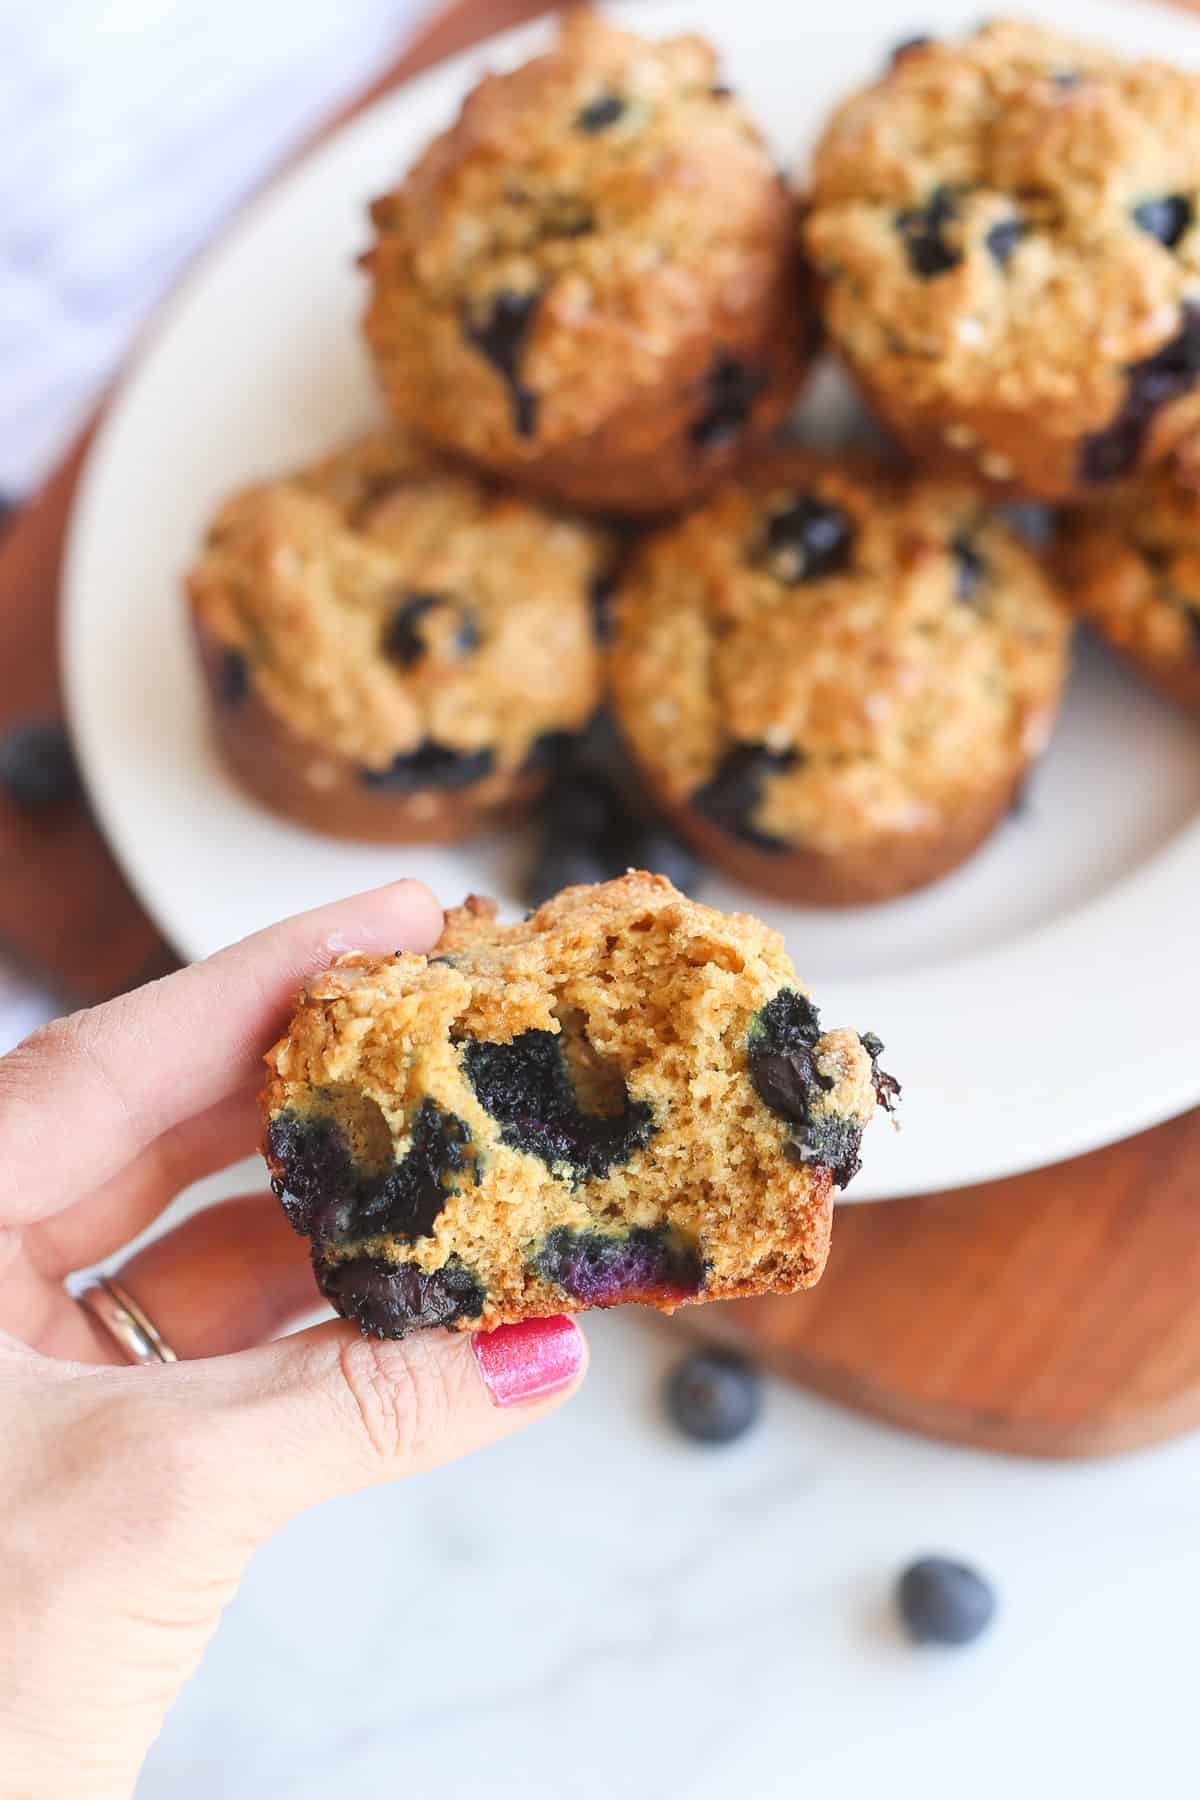 A hand holding a blueberry oatmeal muffin cut in half with a plate of the muffins in the background.